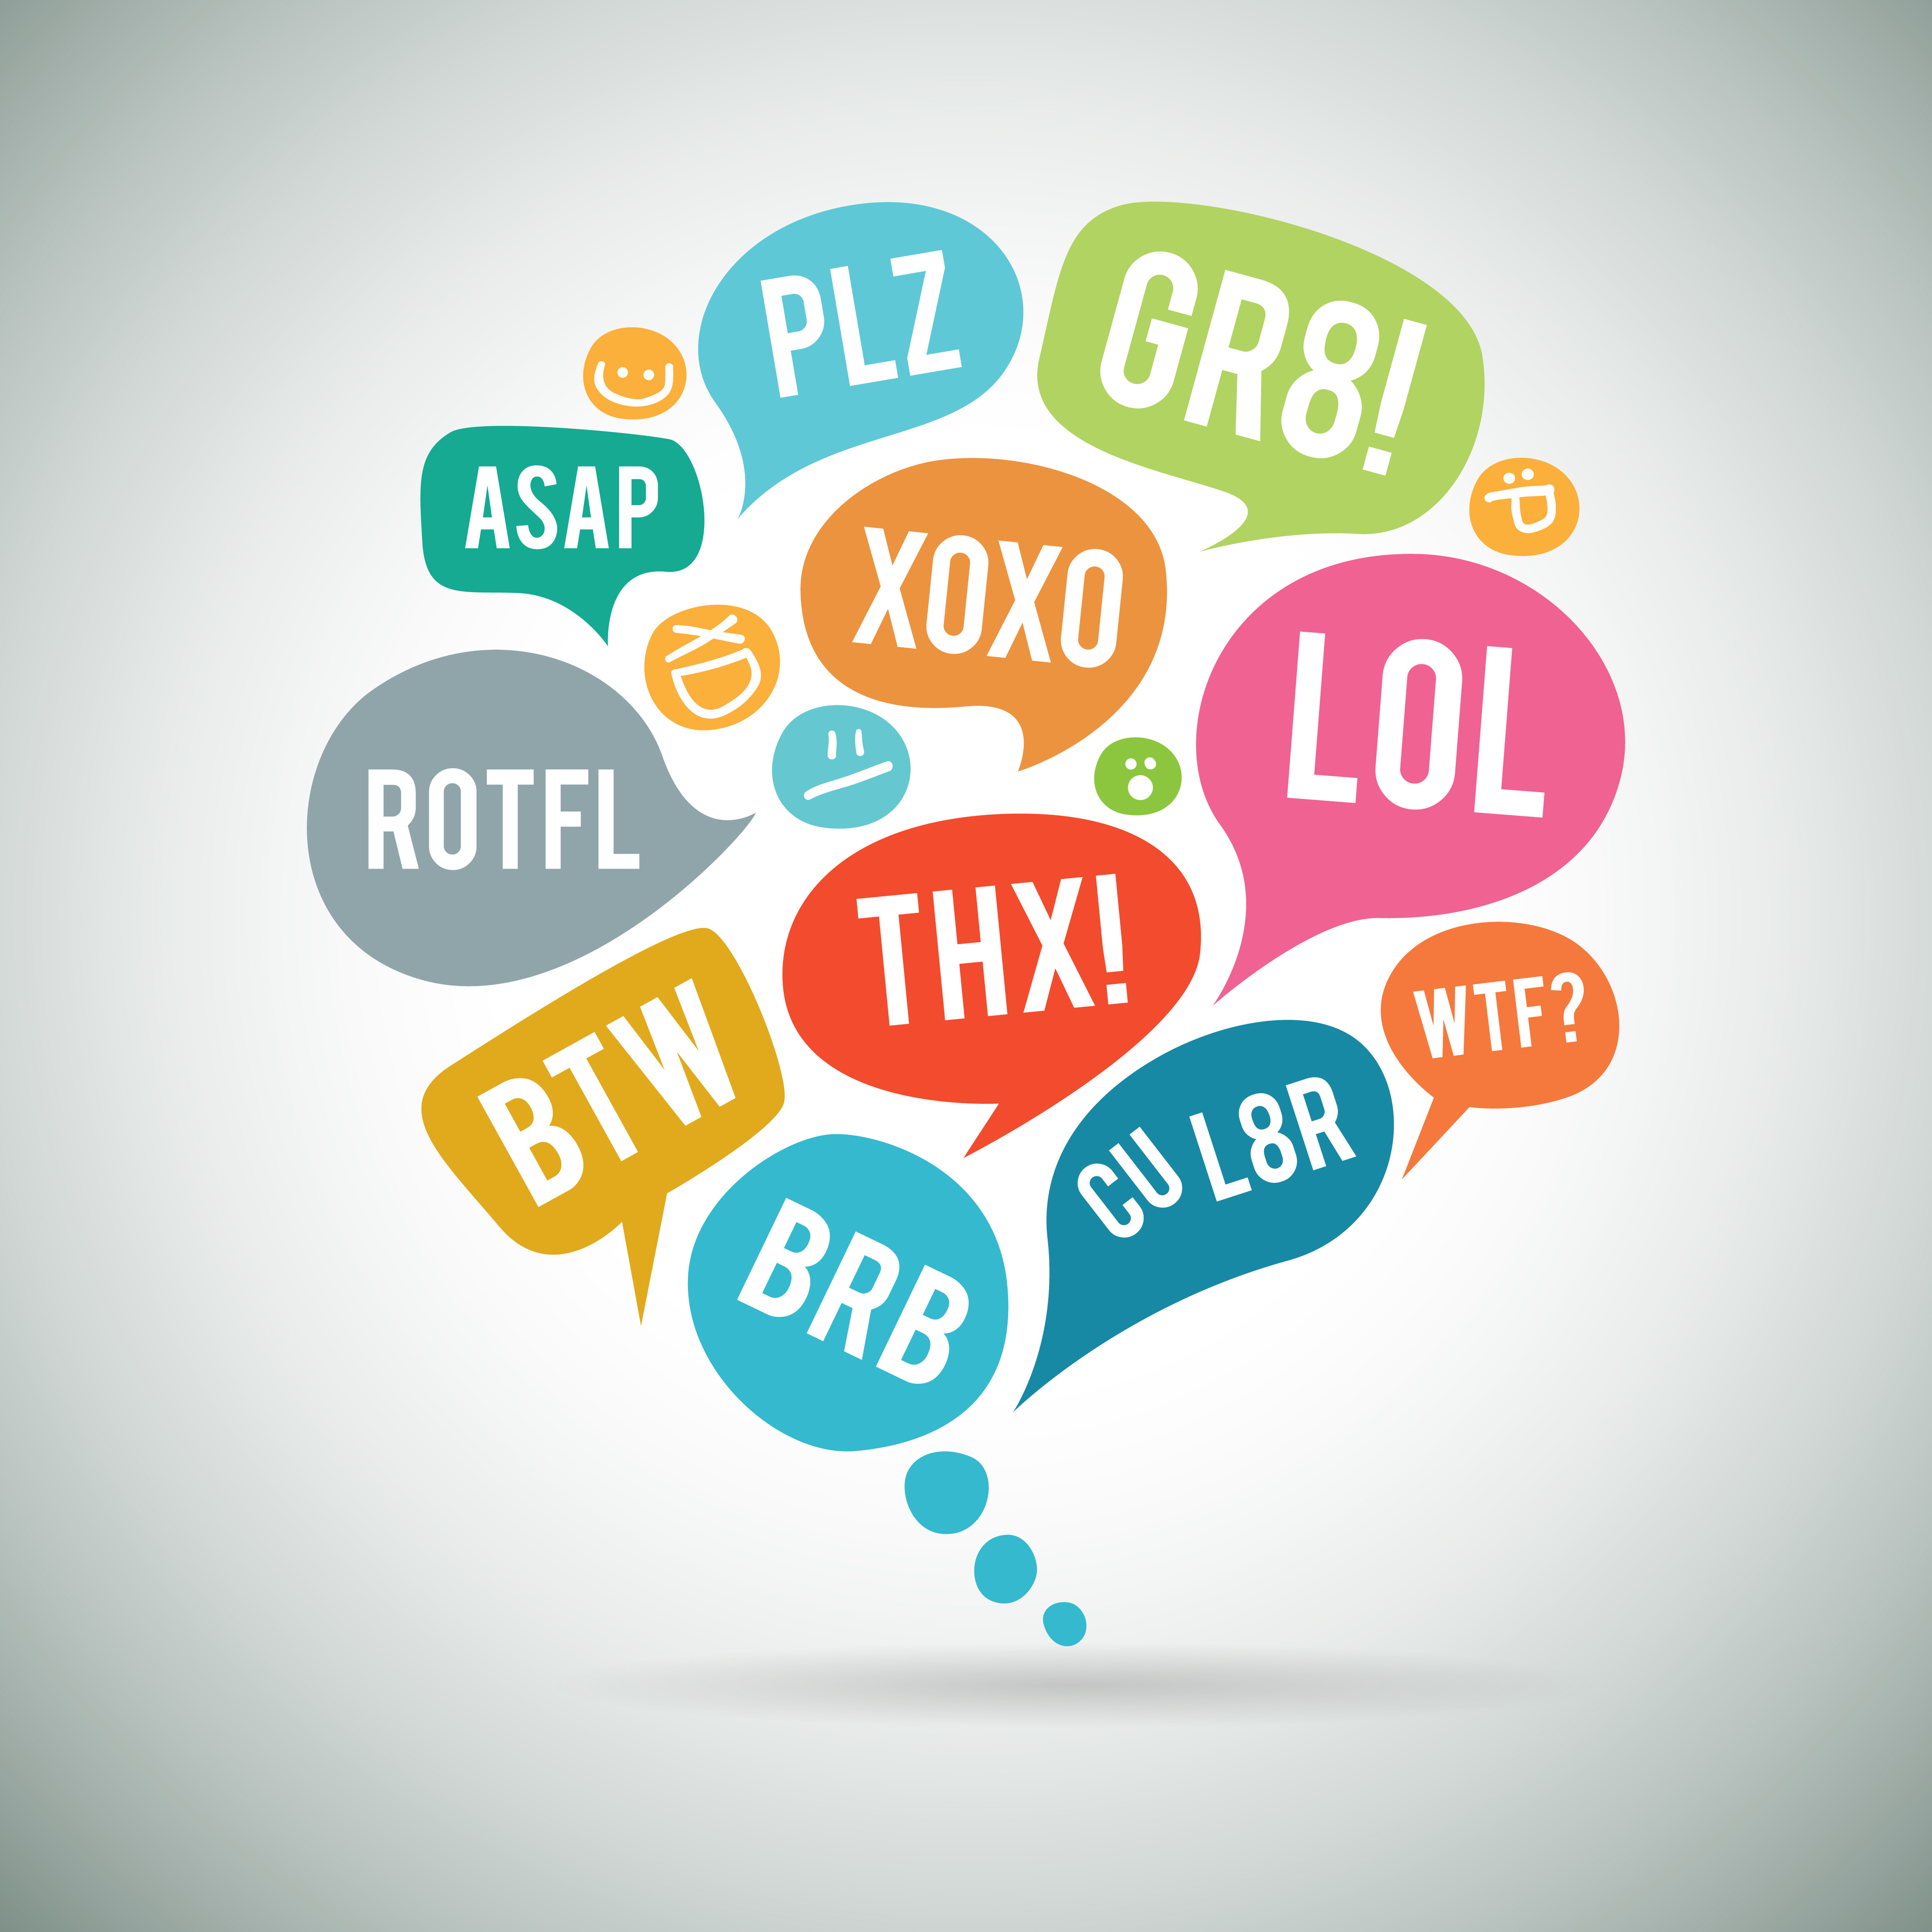 Business Texting: How to Use Text Acronyms the Right Way